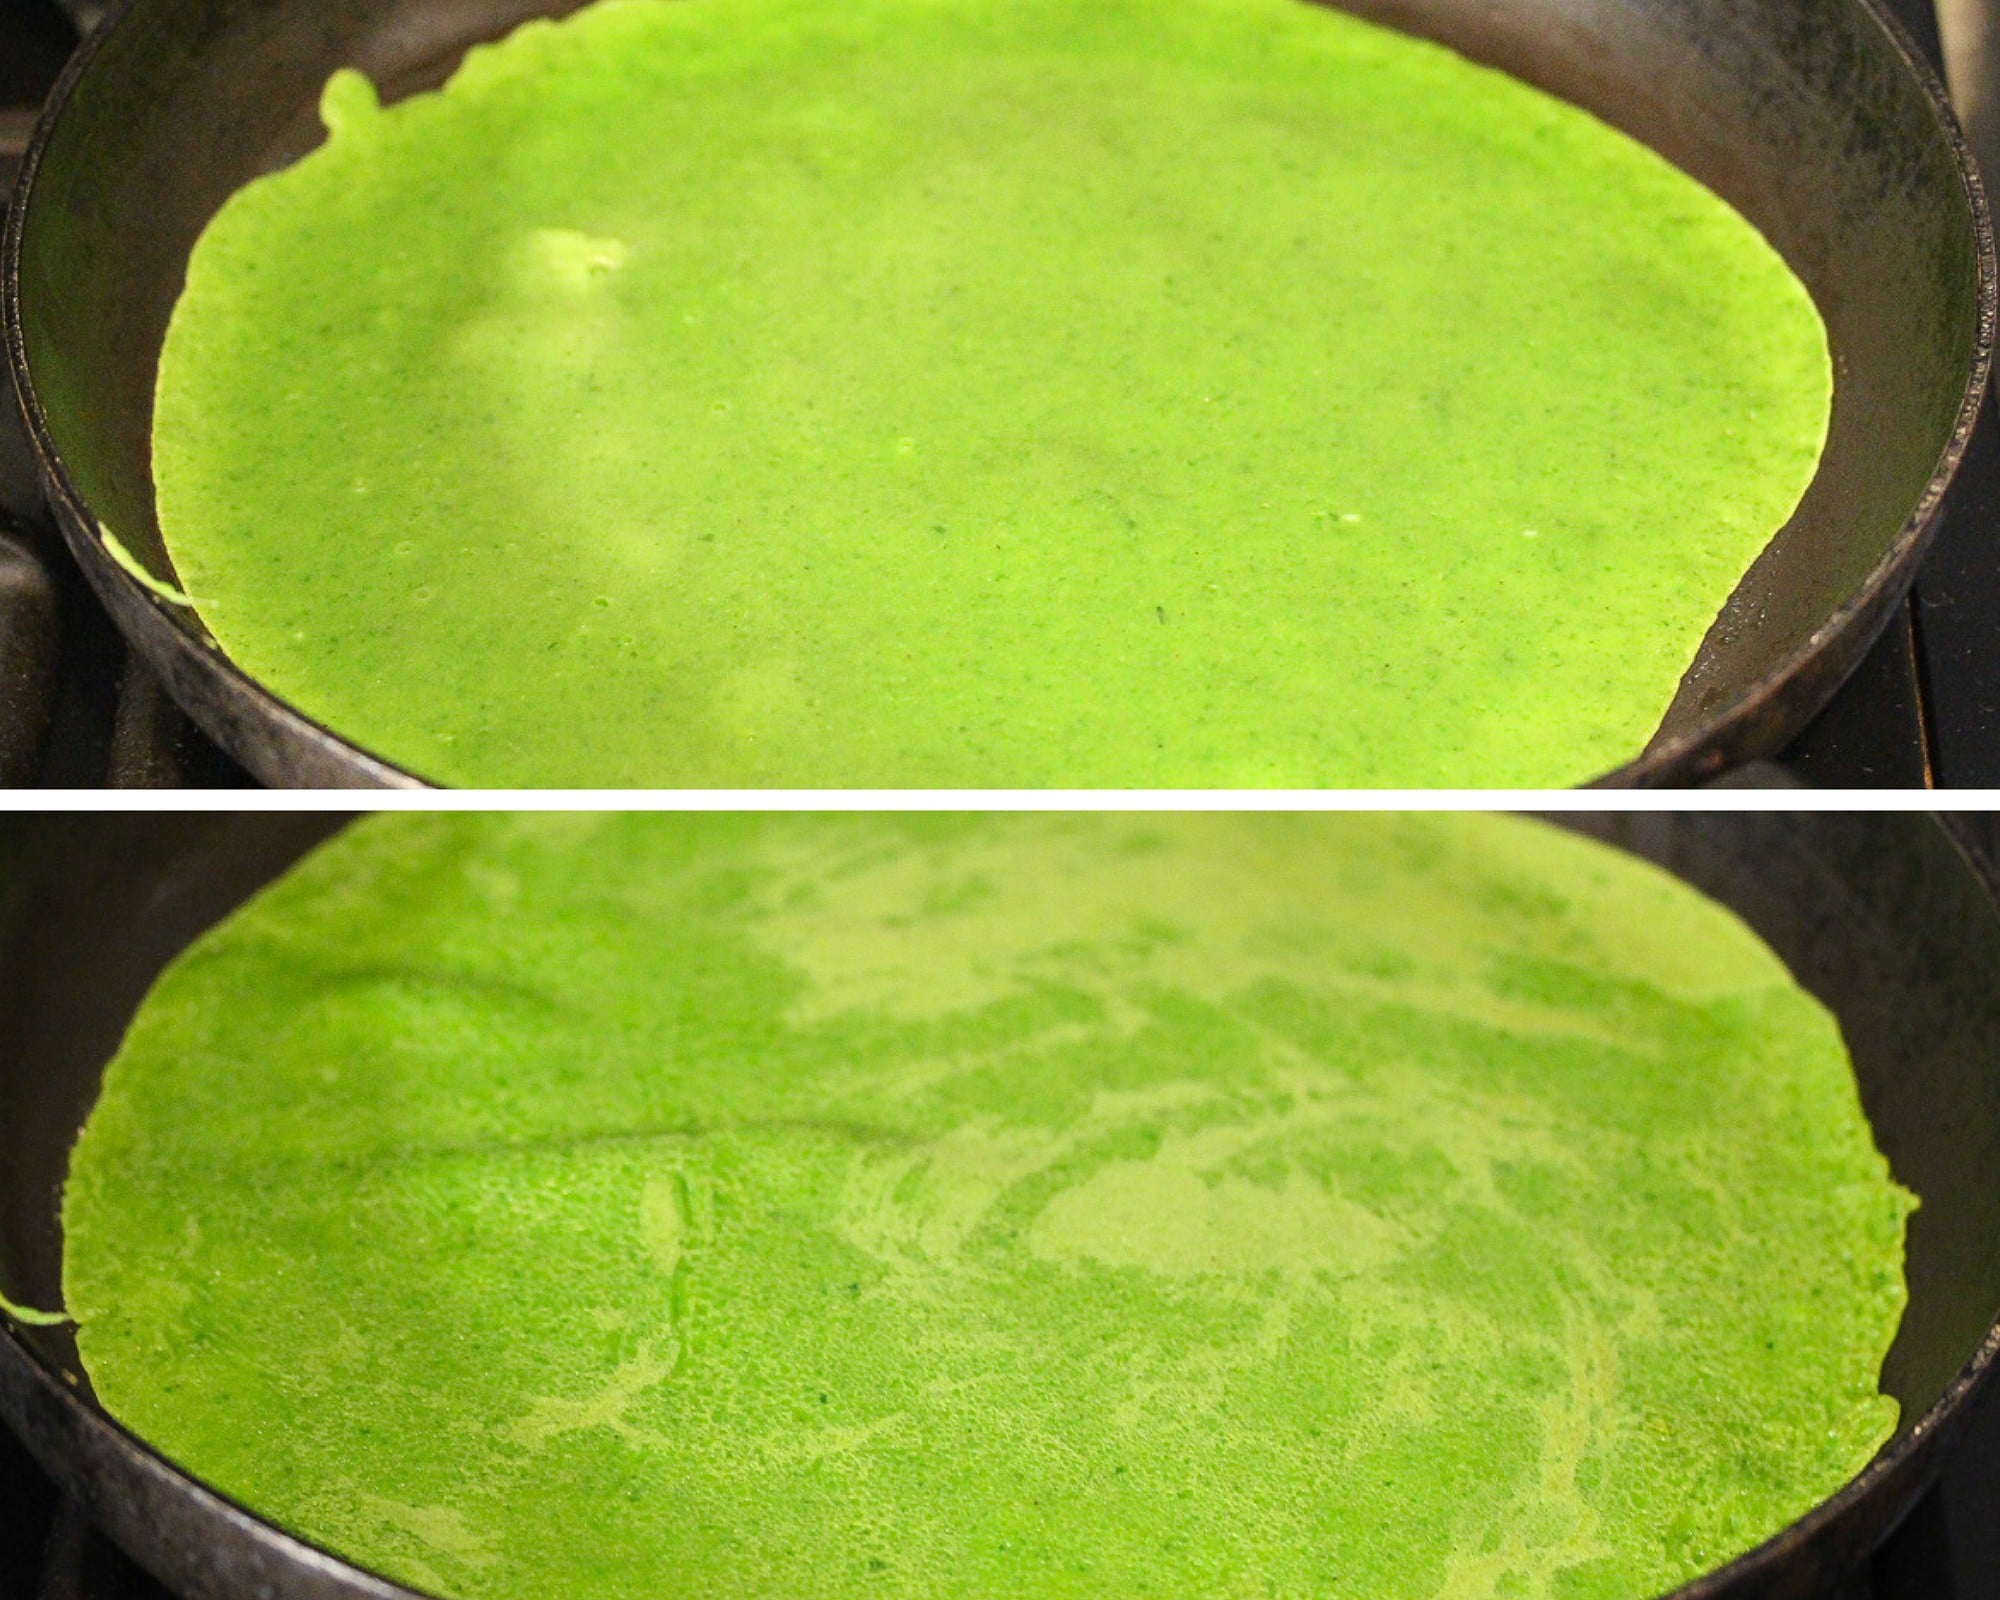 frying green crepes in a non stick pan